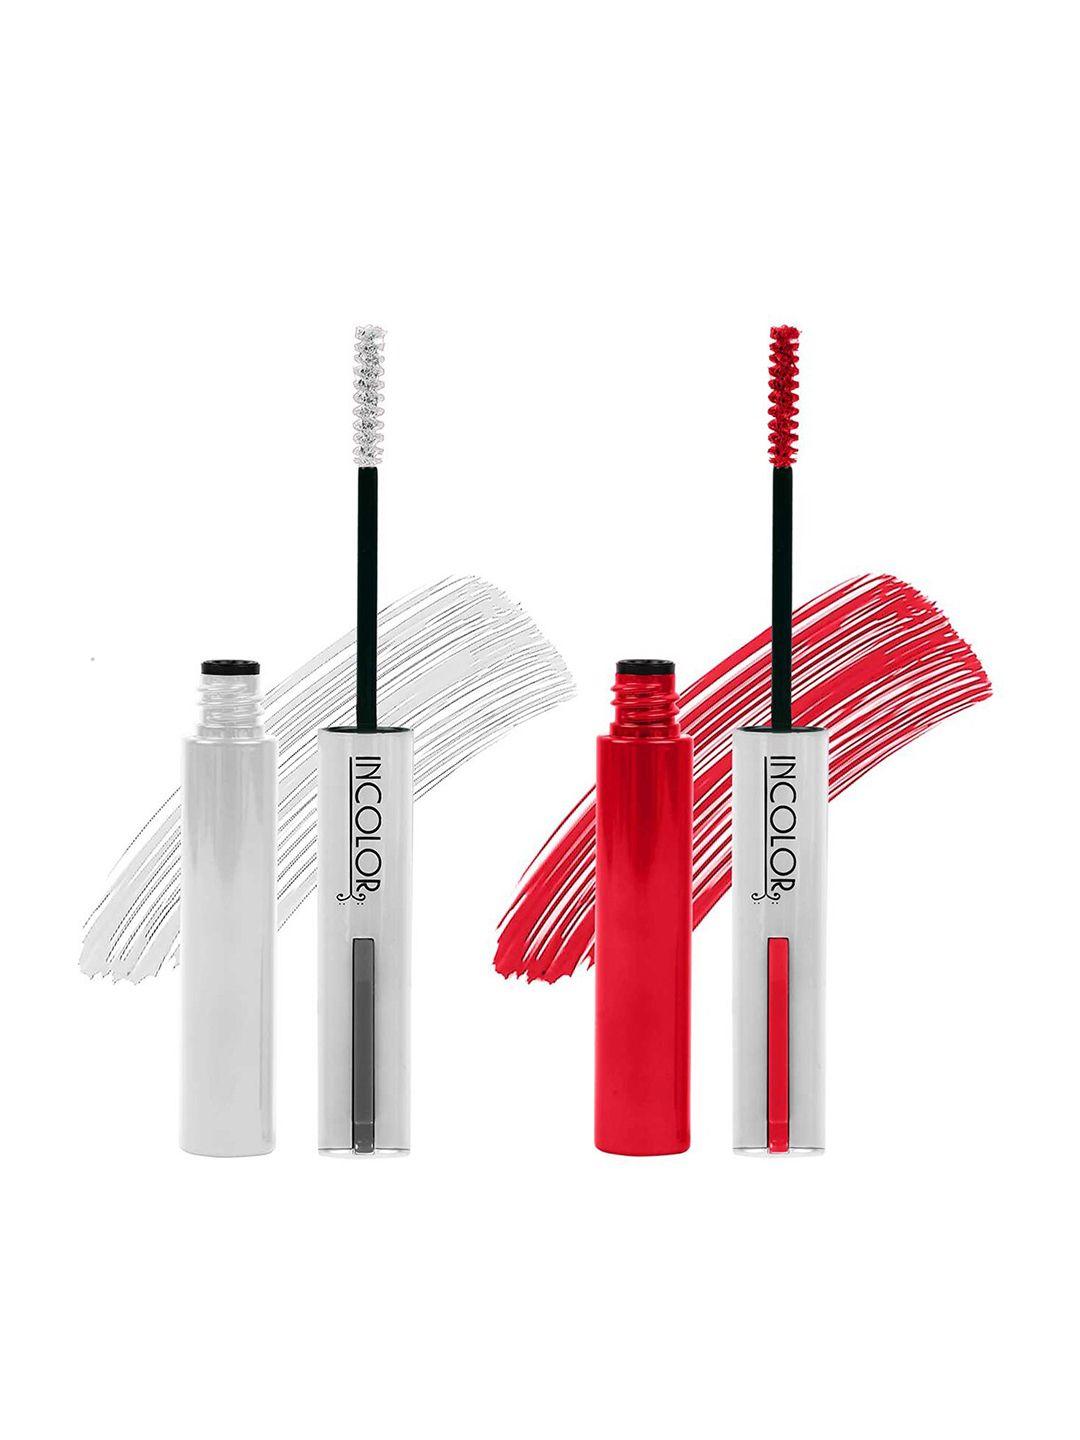 incolor set of 2 long lasting mascaras 6 ml each - milky white 02 & imperial red 05